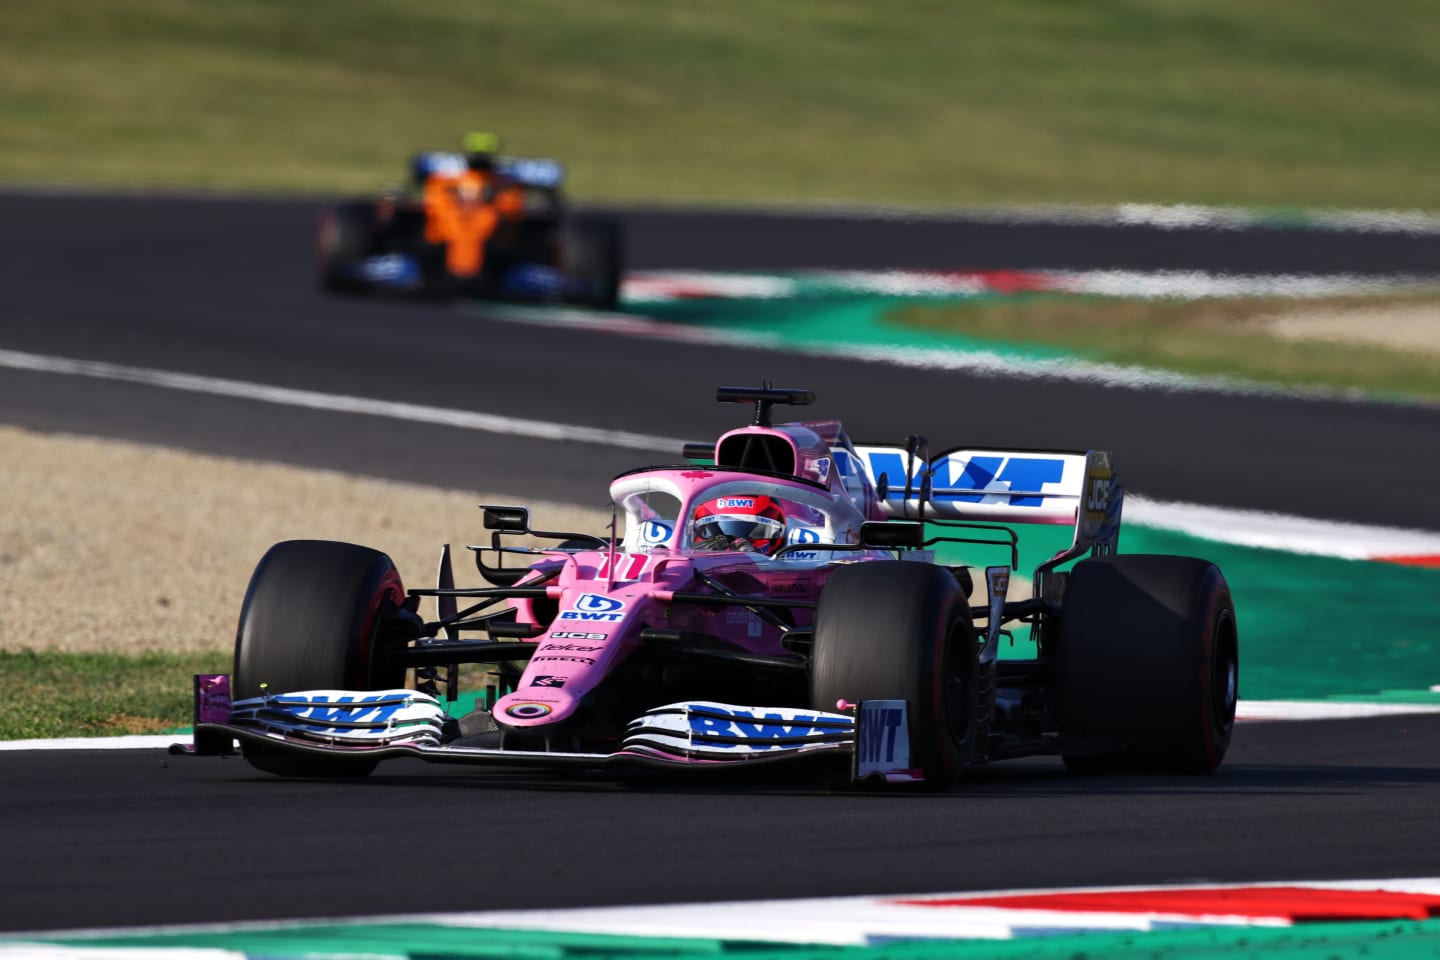 SCARPERIA, ITALY - SEPTEMBER 13: Sergio Perez of Mexico driving the (11) Racing Point RP20 Mercedes during the F1 Grand Prix of Tuscany at Mugello Circuit on September 13, 2020 in Scarperia, Italy. (Photo by Mark Thompson/Getty Images)